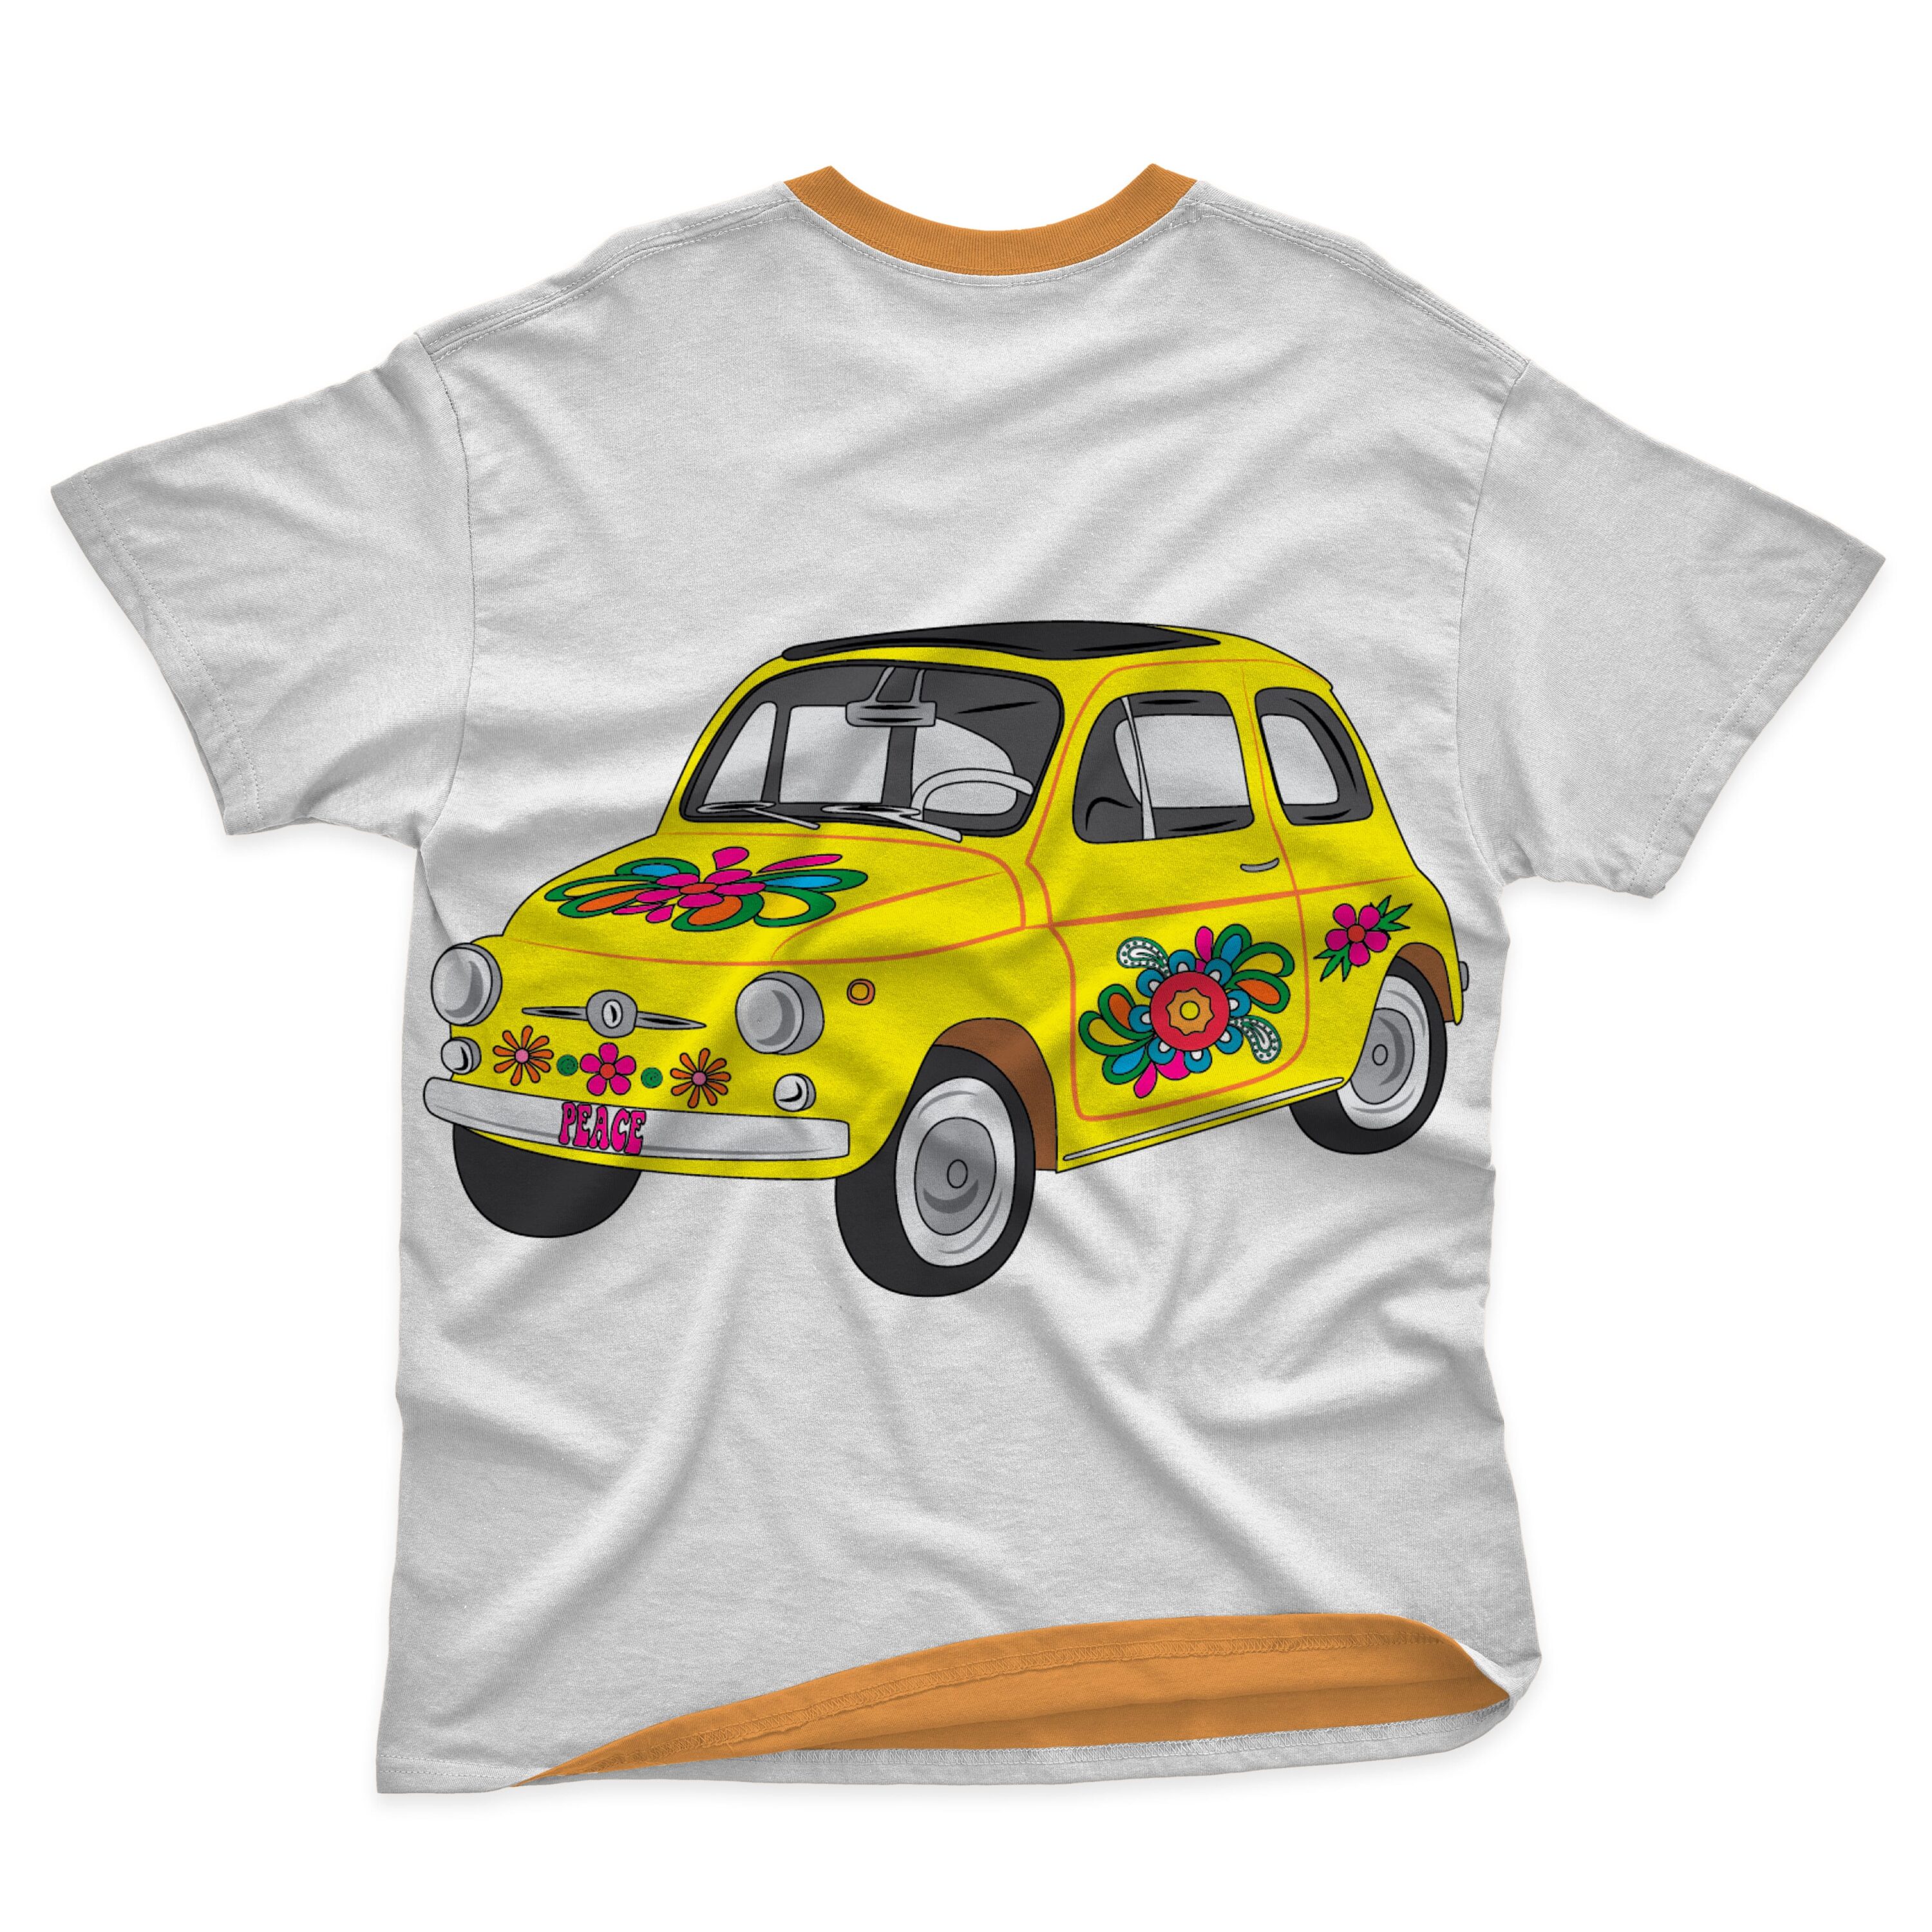 T-shirt design with printed hippie yellow car on it.